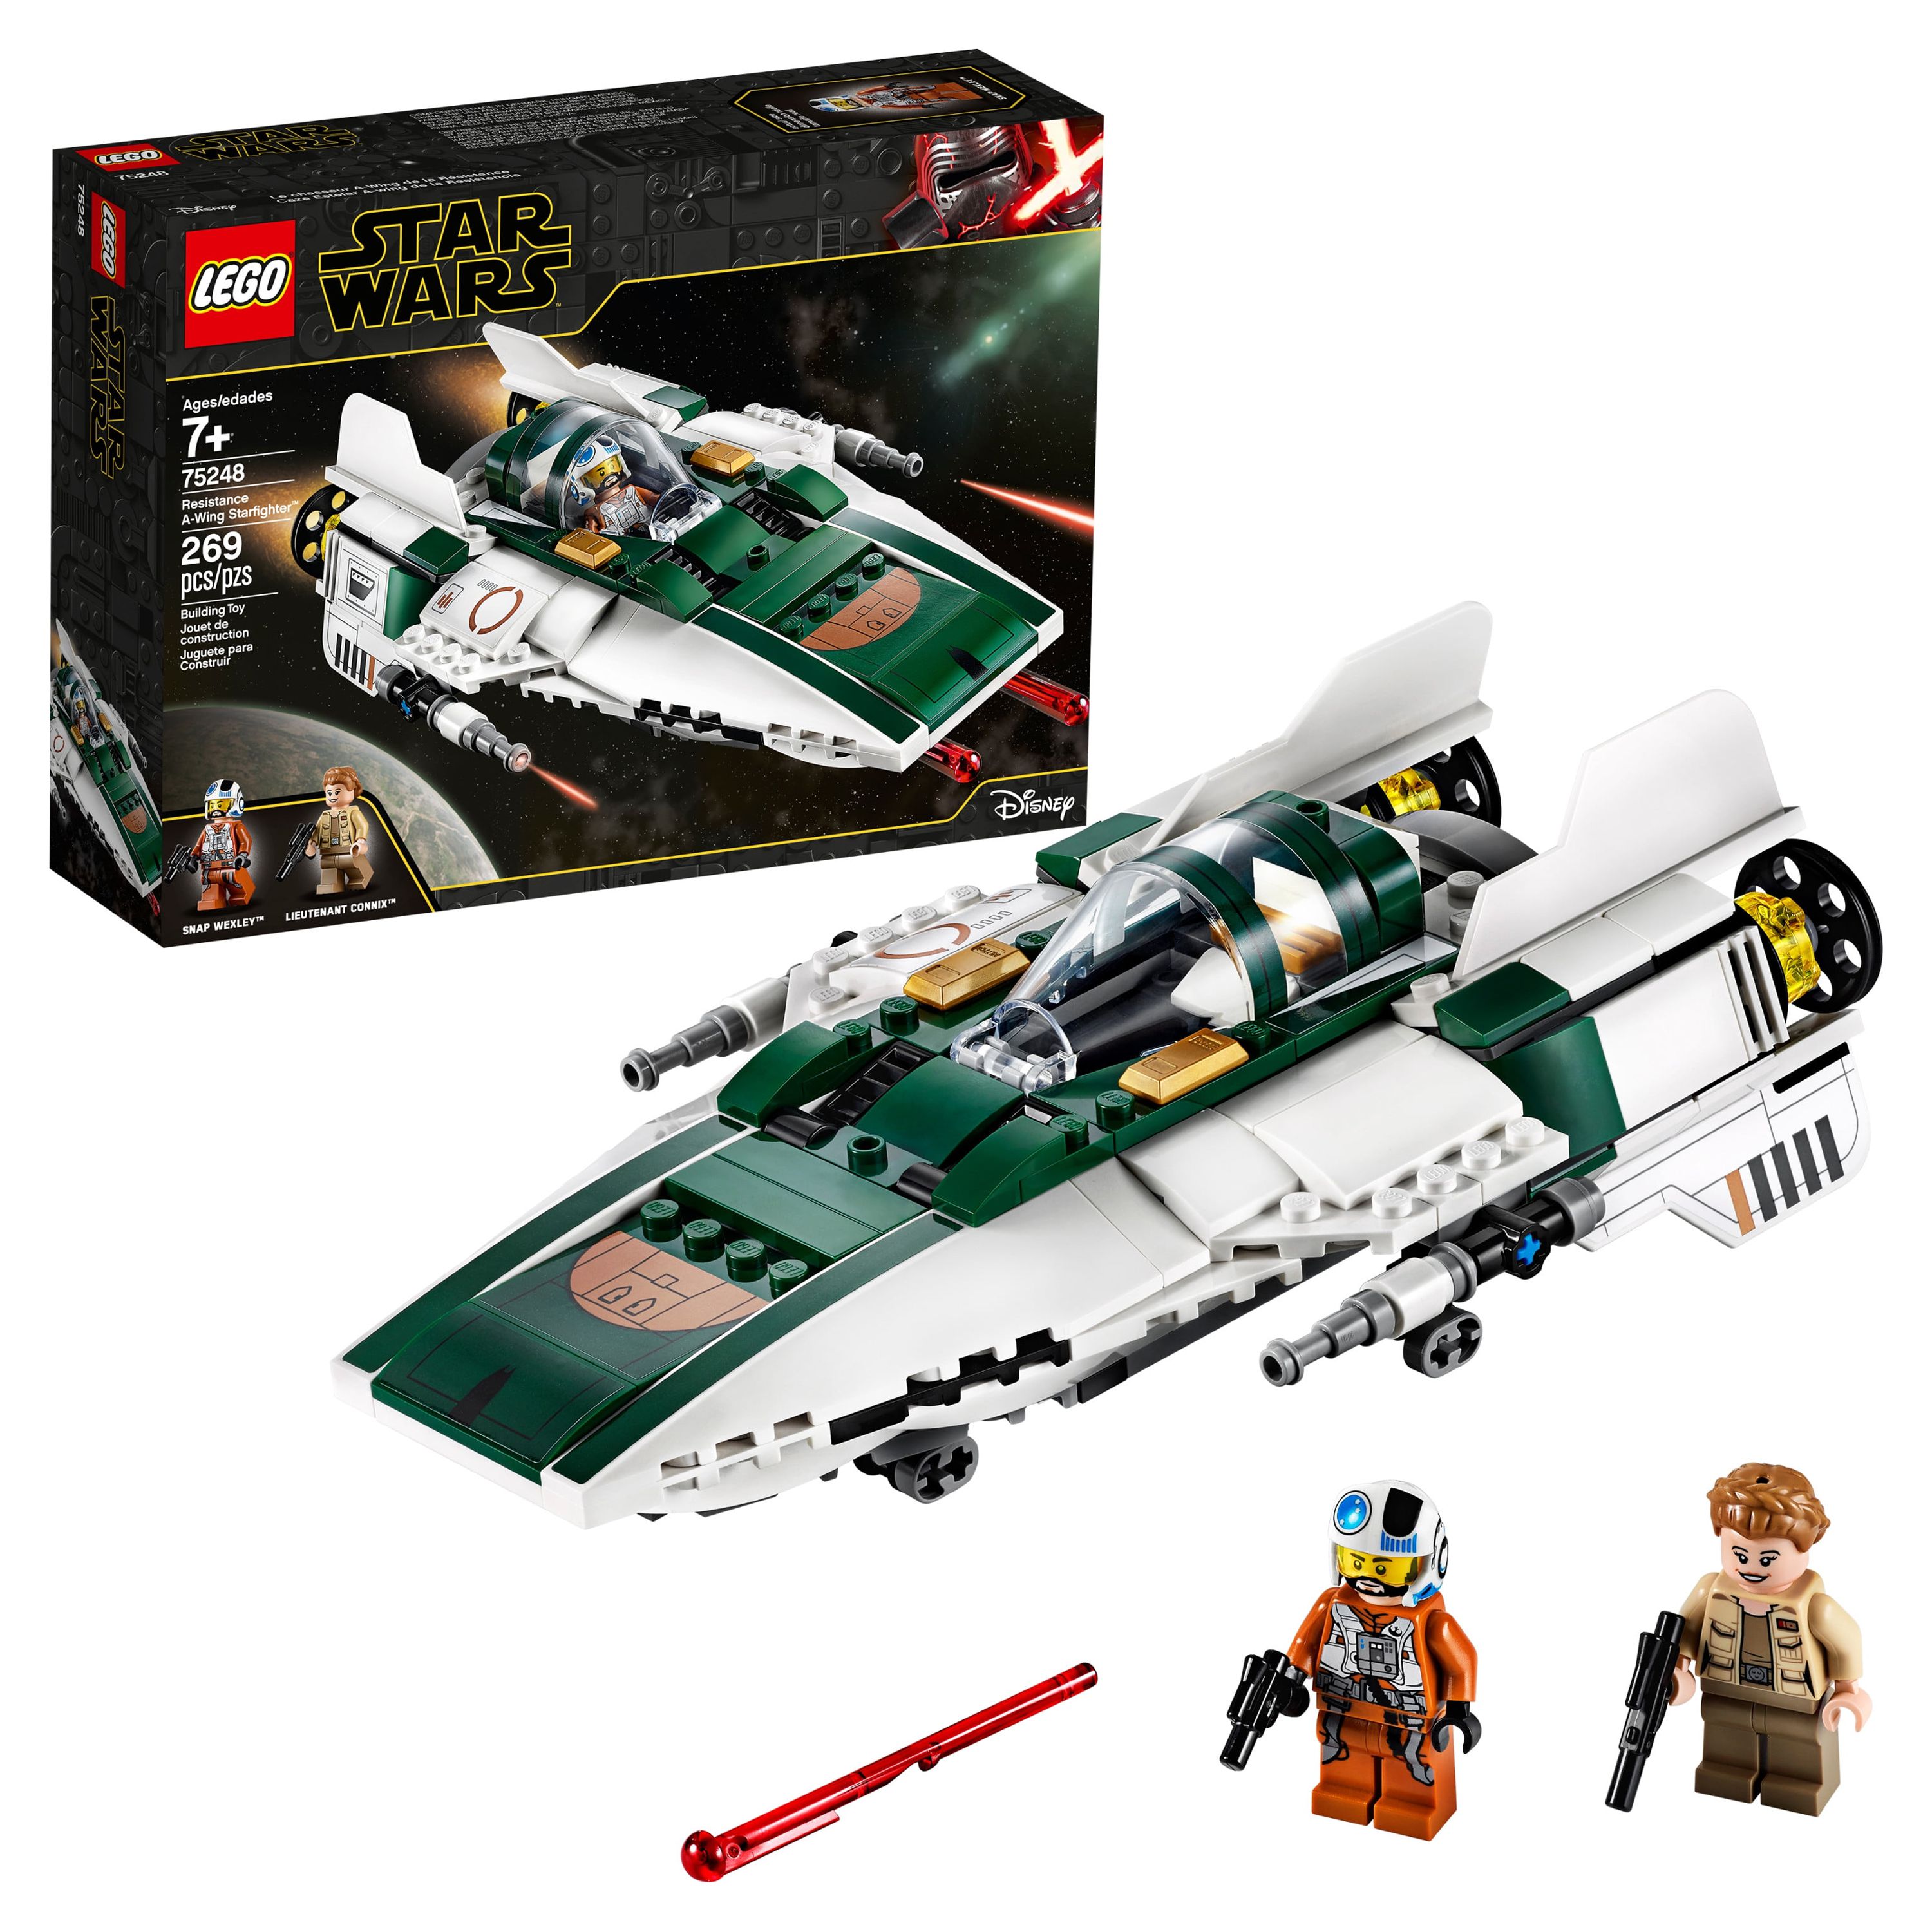 LEGO Star Wars: The Rise of Skywalker Resistance A-Wing Starfighter 75248 Advanced Collectible Starship Model Set (269 Pieces) - image 1 of 6